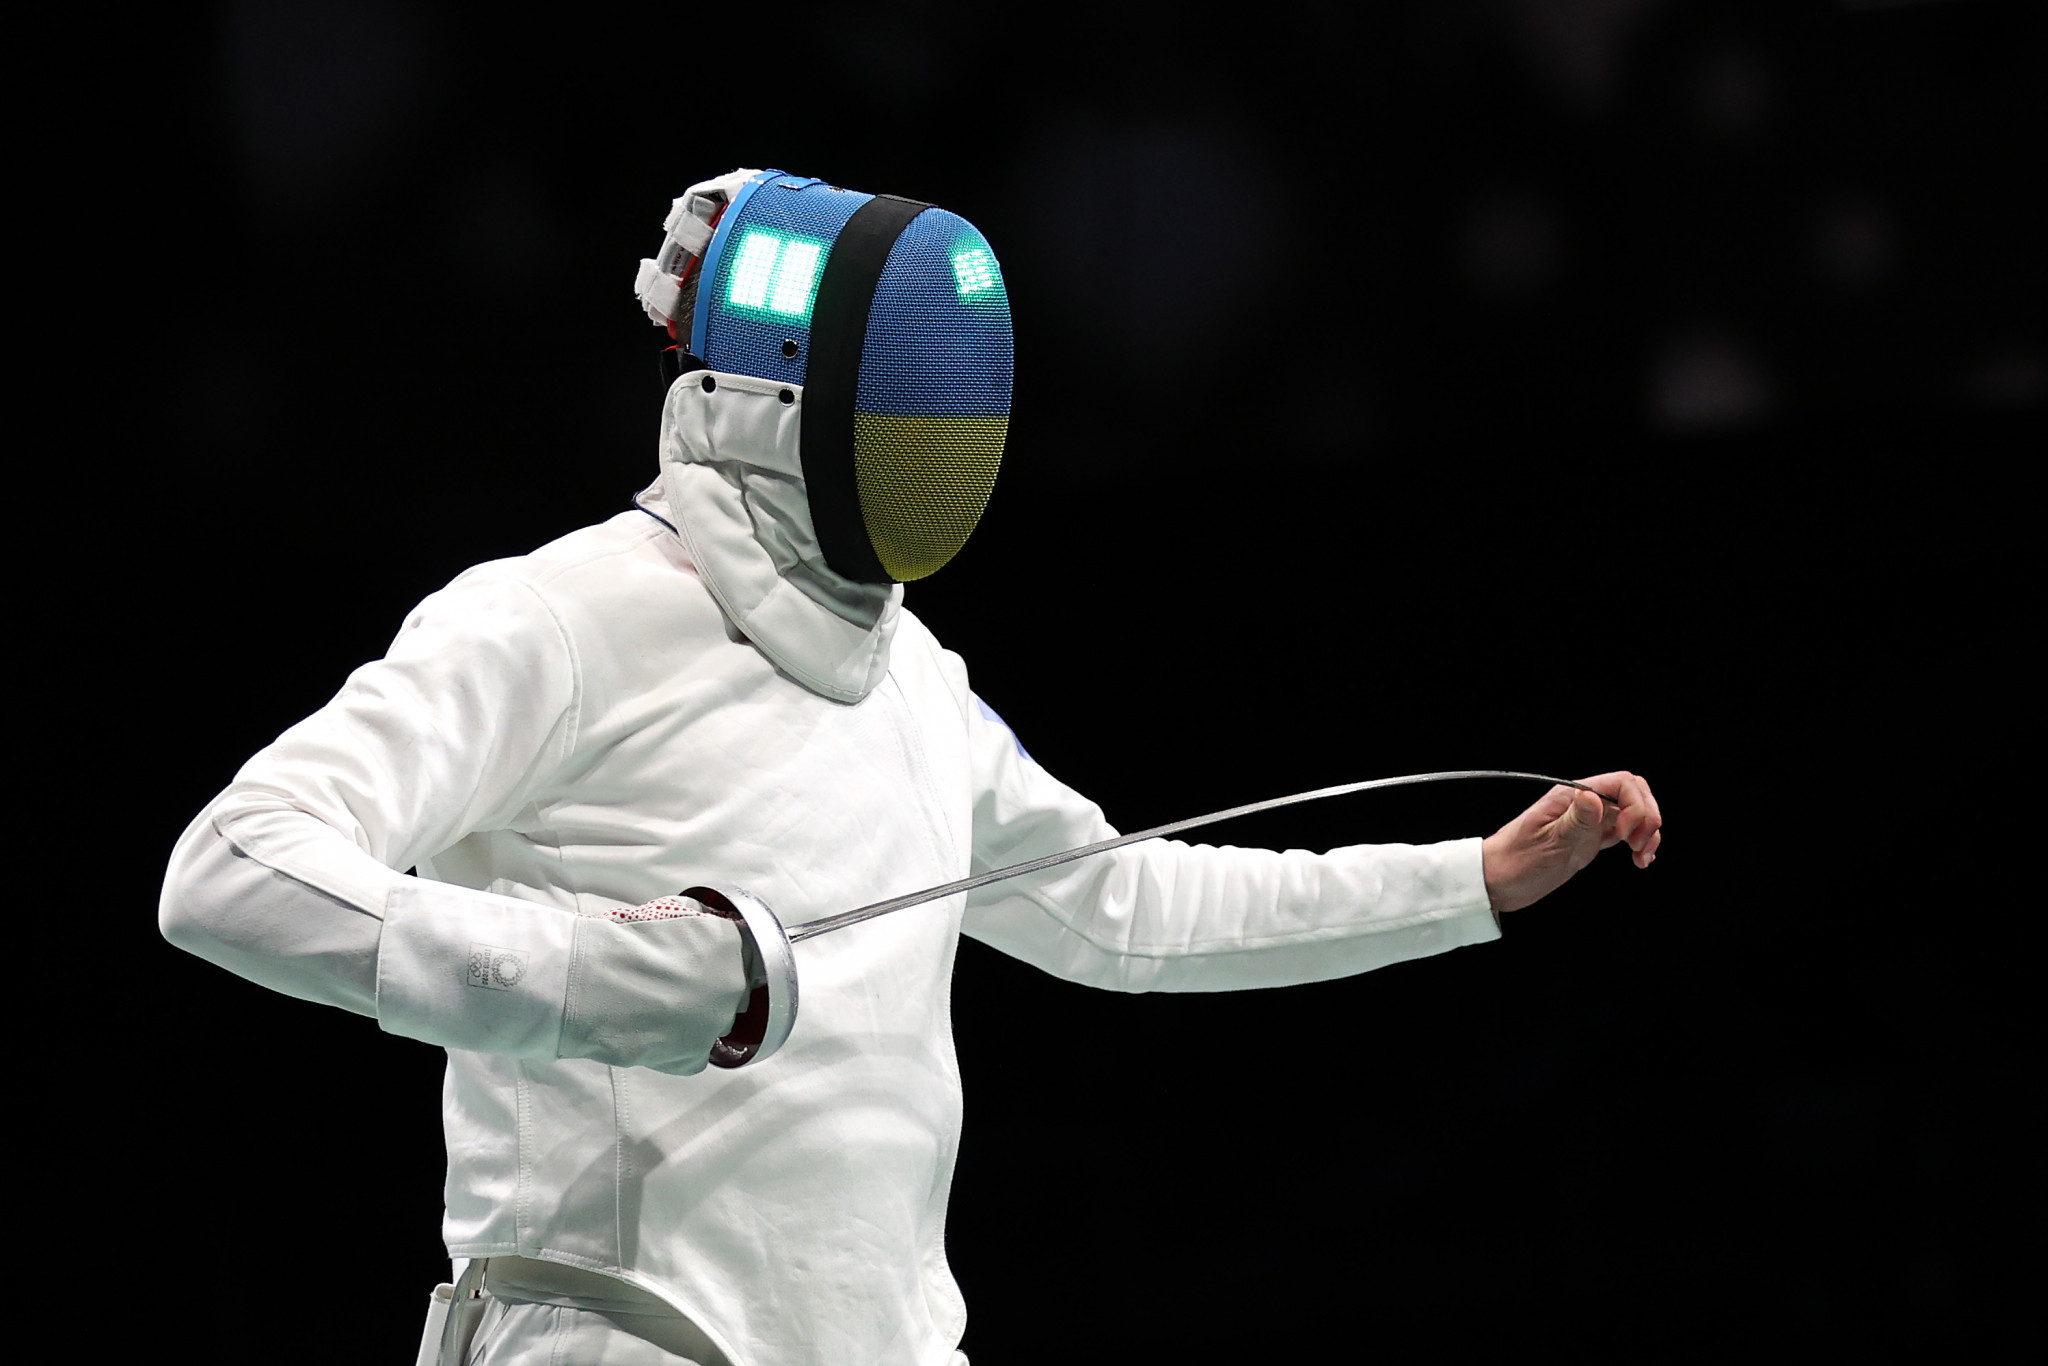 The Ukrainian Fencing Federation is urging that Russian athletes not be allowed to return to competition, even as neutrals ©Getty Images